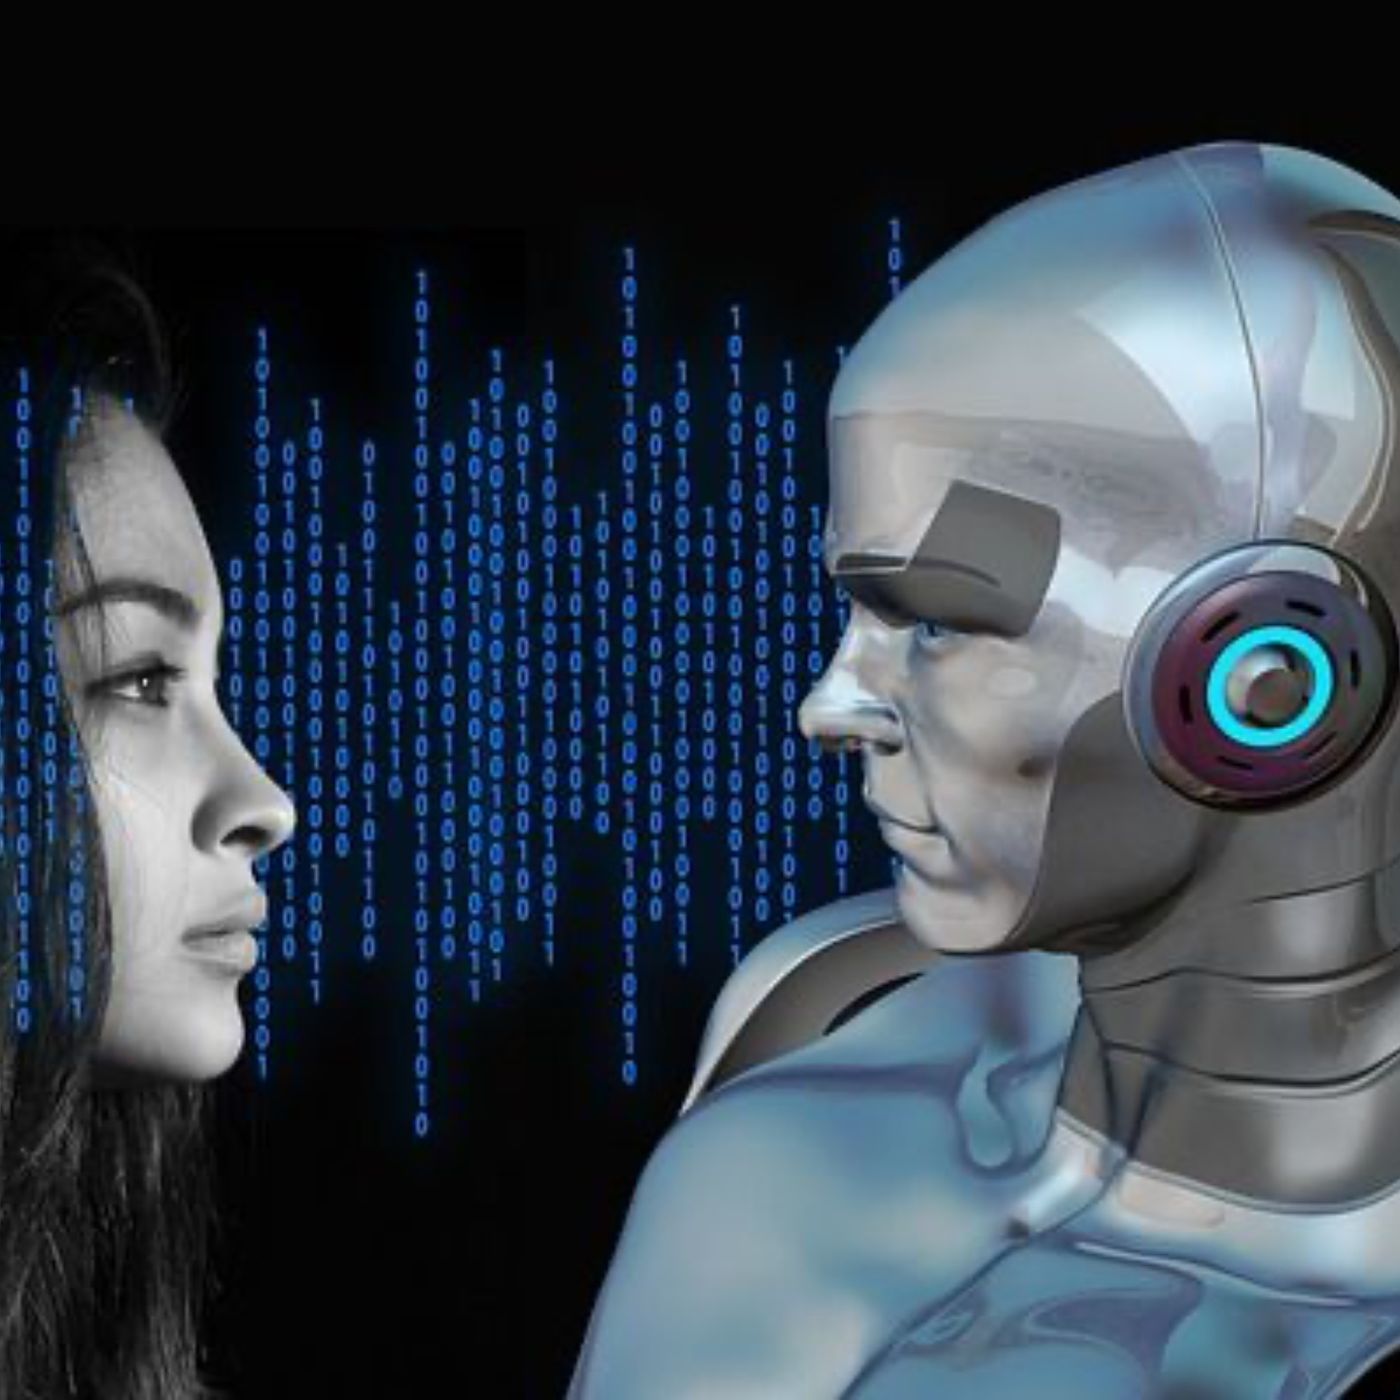 Will AI take over human beings?